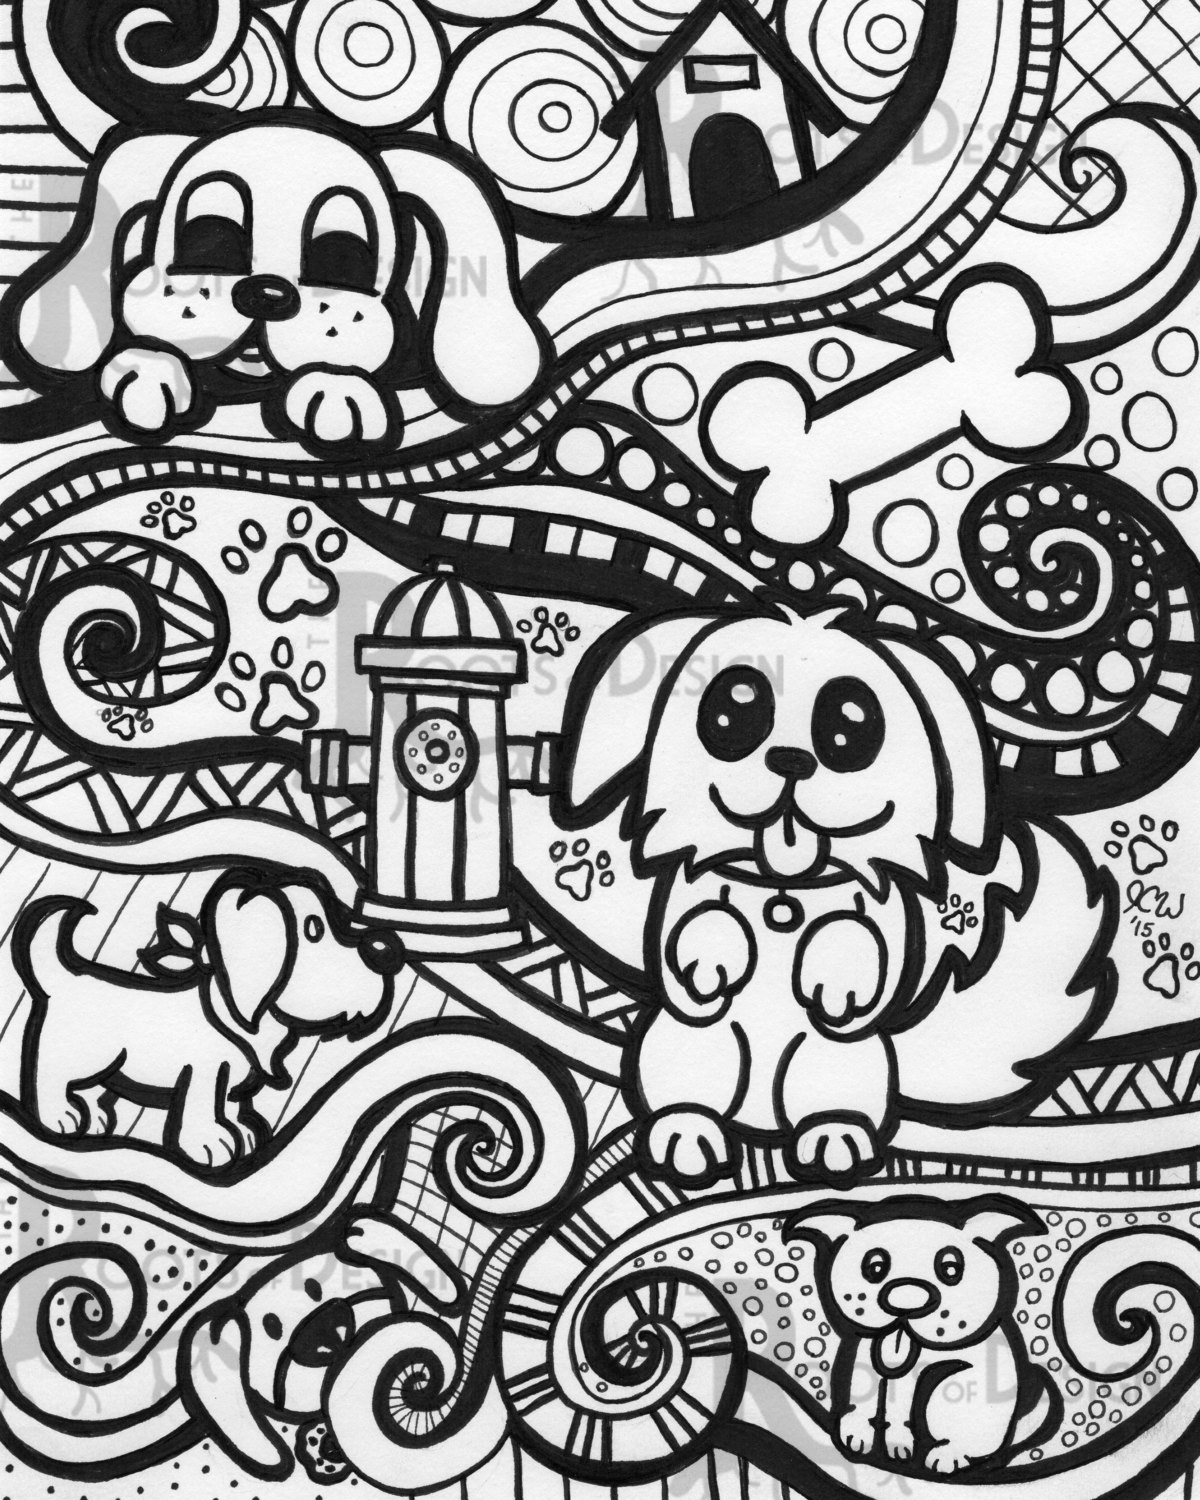 Download INSTANT DOWNLOAD Coloring Page Dog Art Print zentangle | Etsy